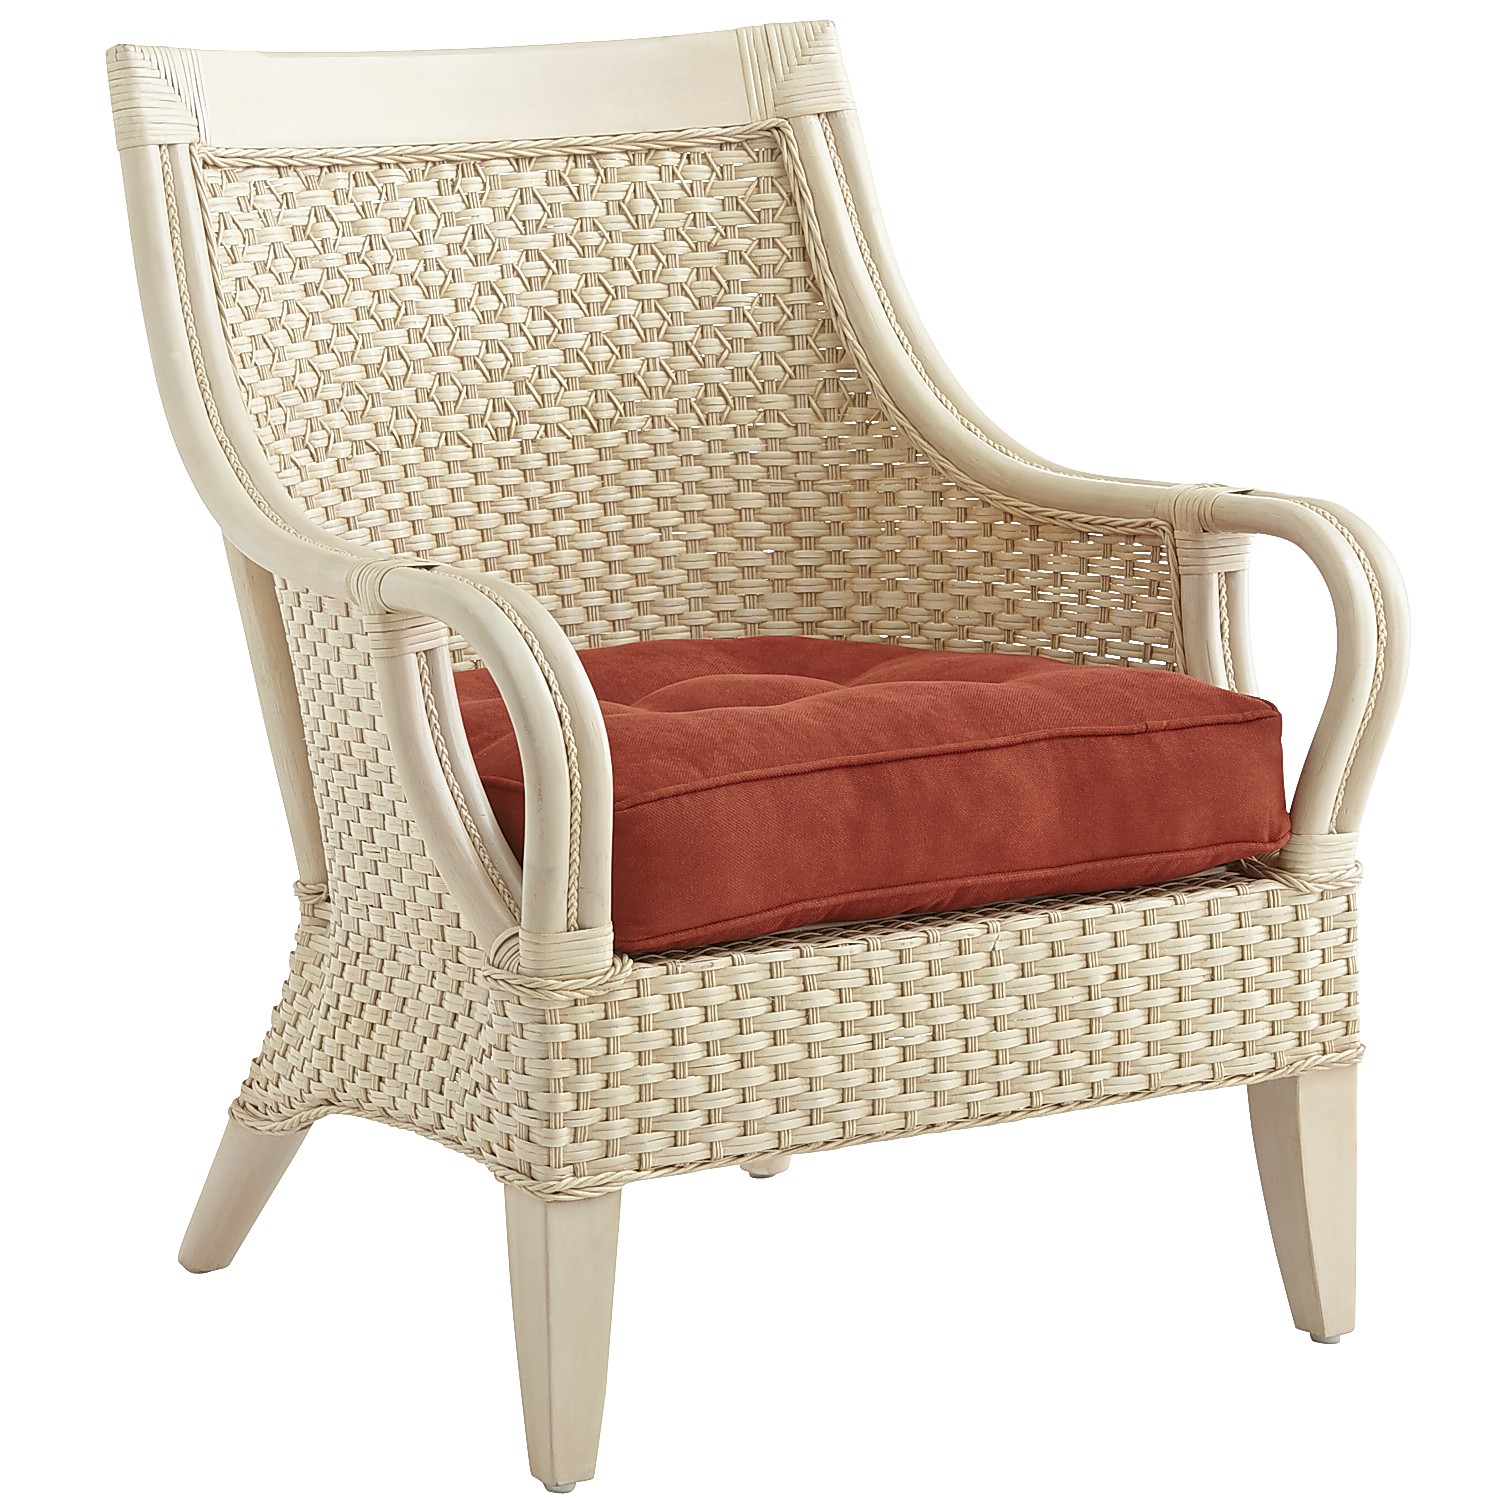 Pier 1 Imports Recalls Temani Wicker Furniture Due To Violation Of Federal Lead Paint Standard Cpsc Gov